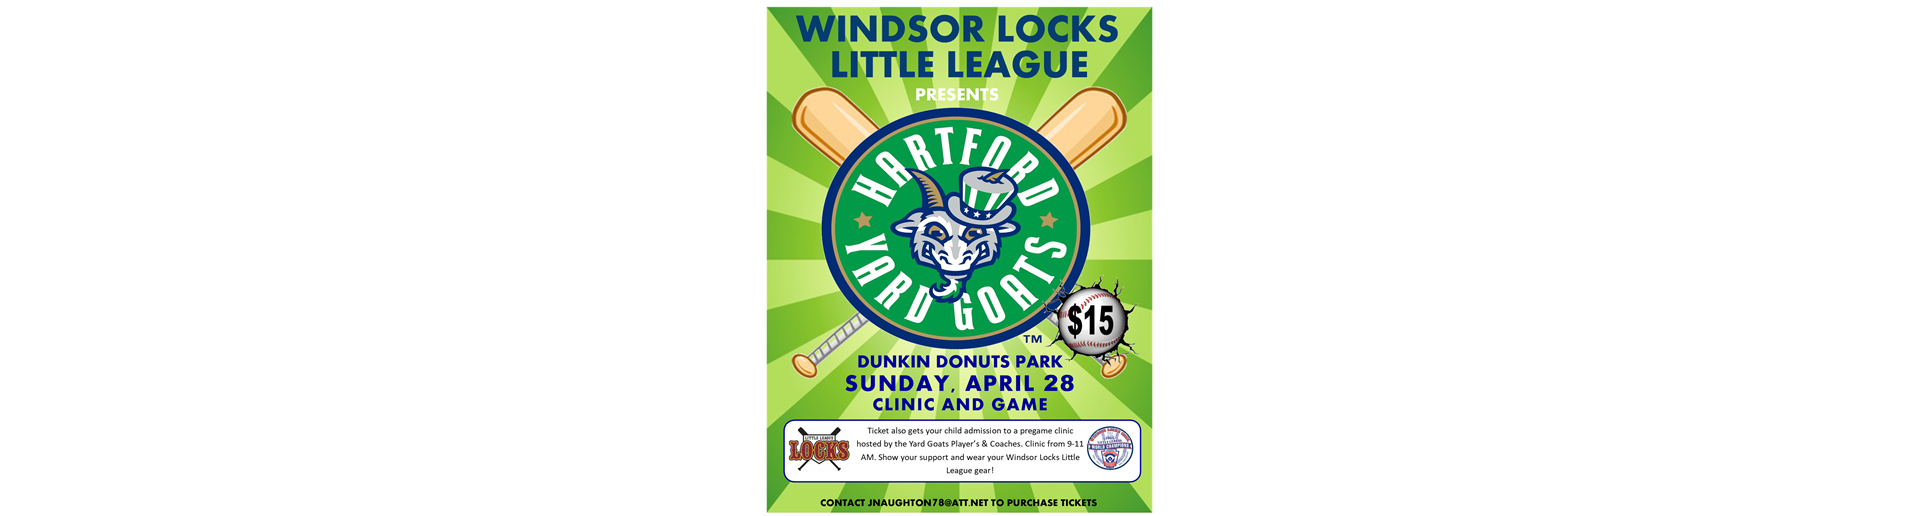 Yard Goats Game and Clinic